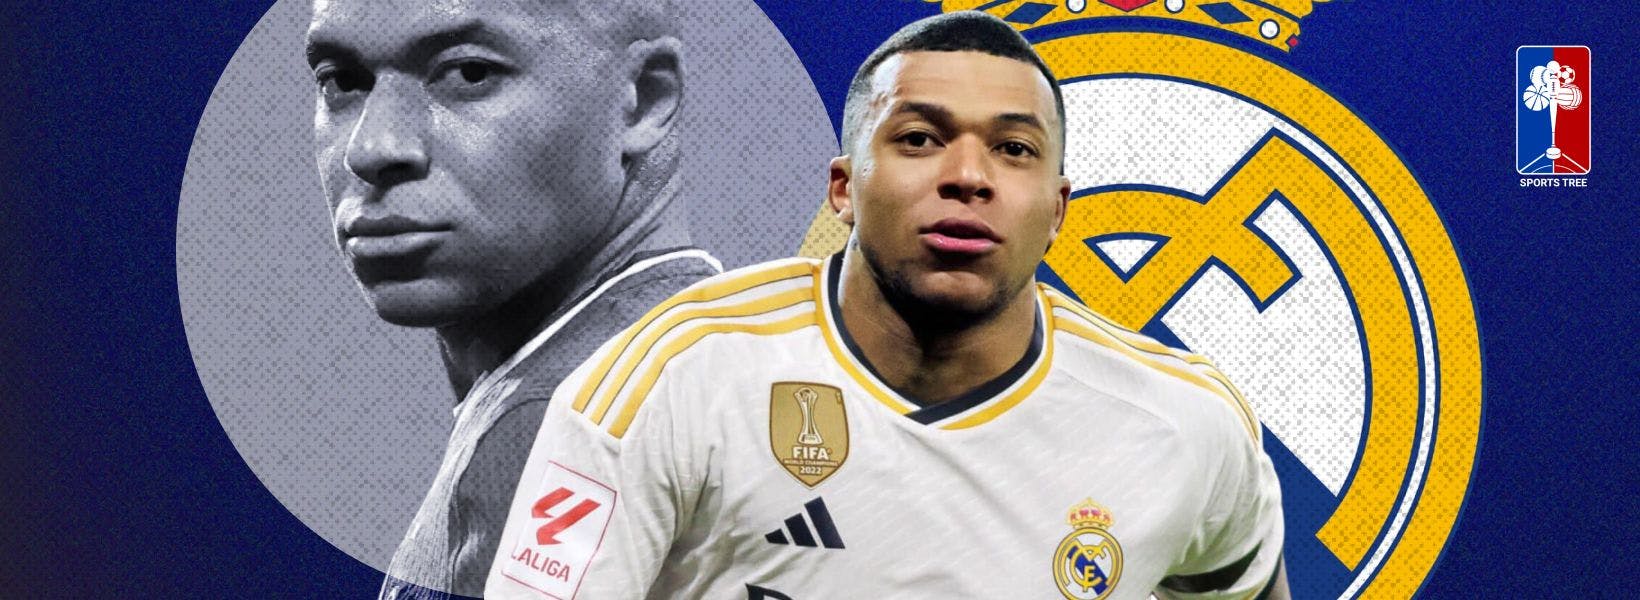 Kylian Mbappé is now officially playing for Real Madrid. 